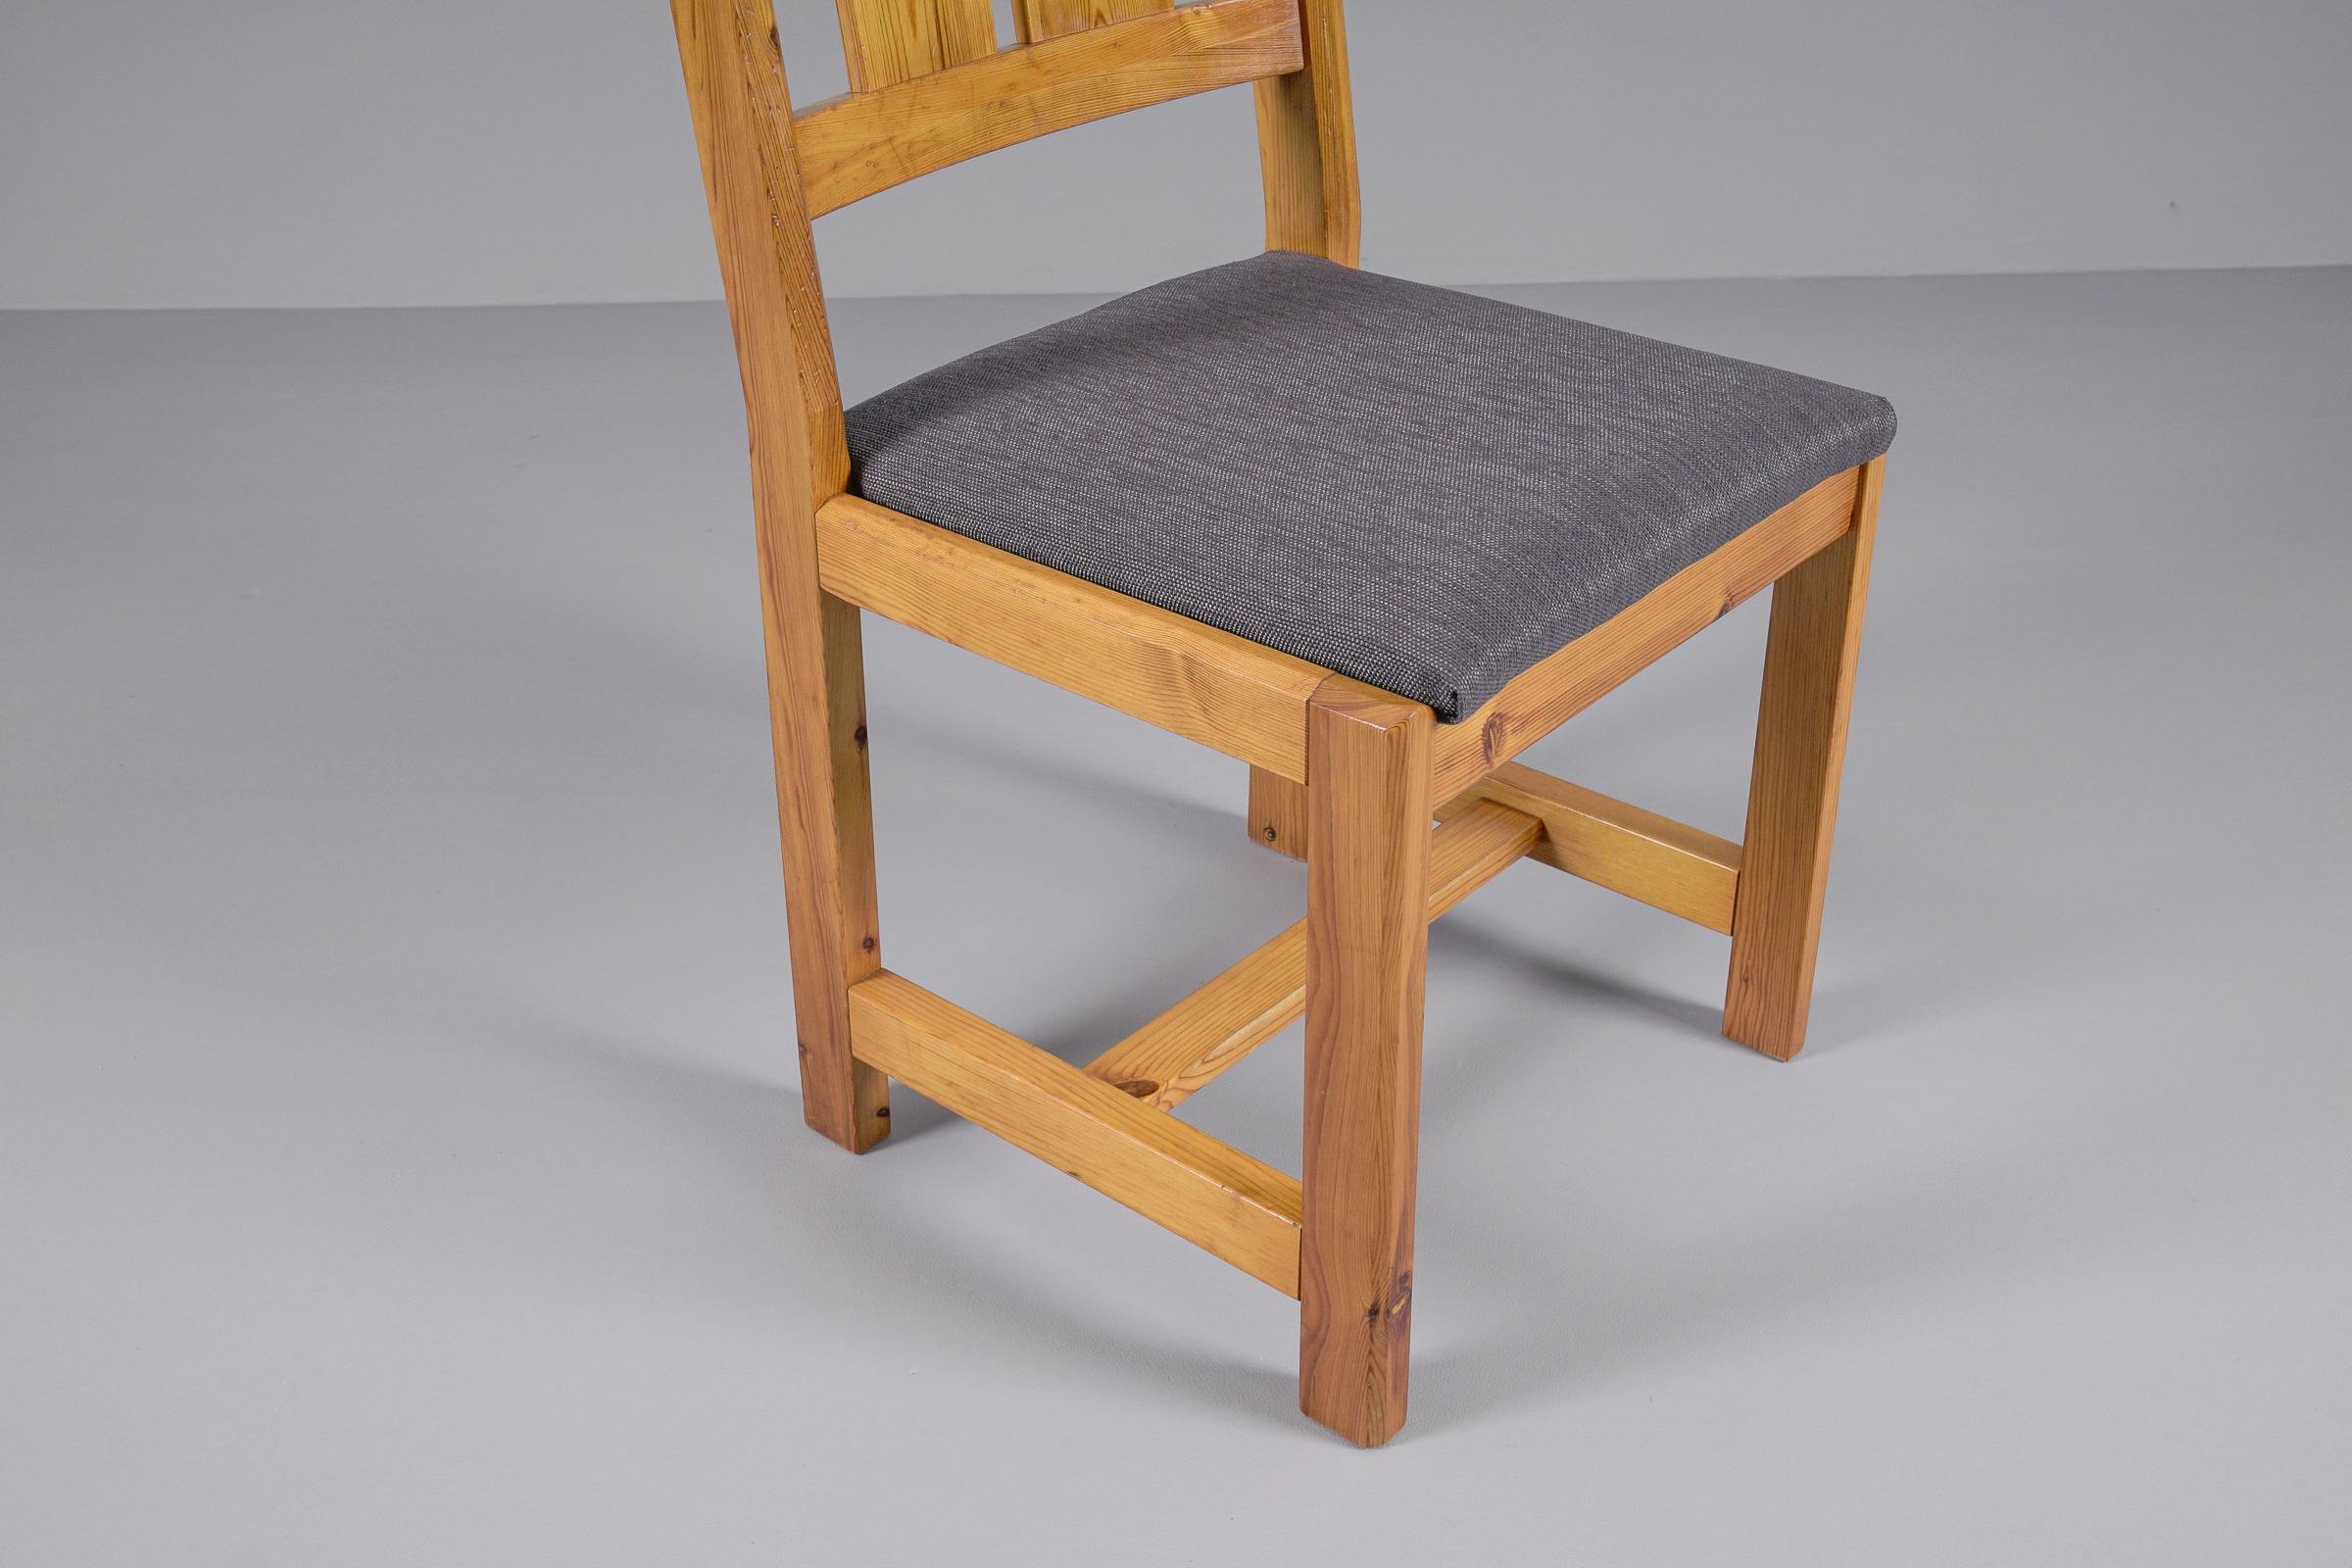  Set of 4 Swedish Pine Chairs by Gilbert Marklund for Furusnickarn AB, 1970s For Sale 13